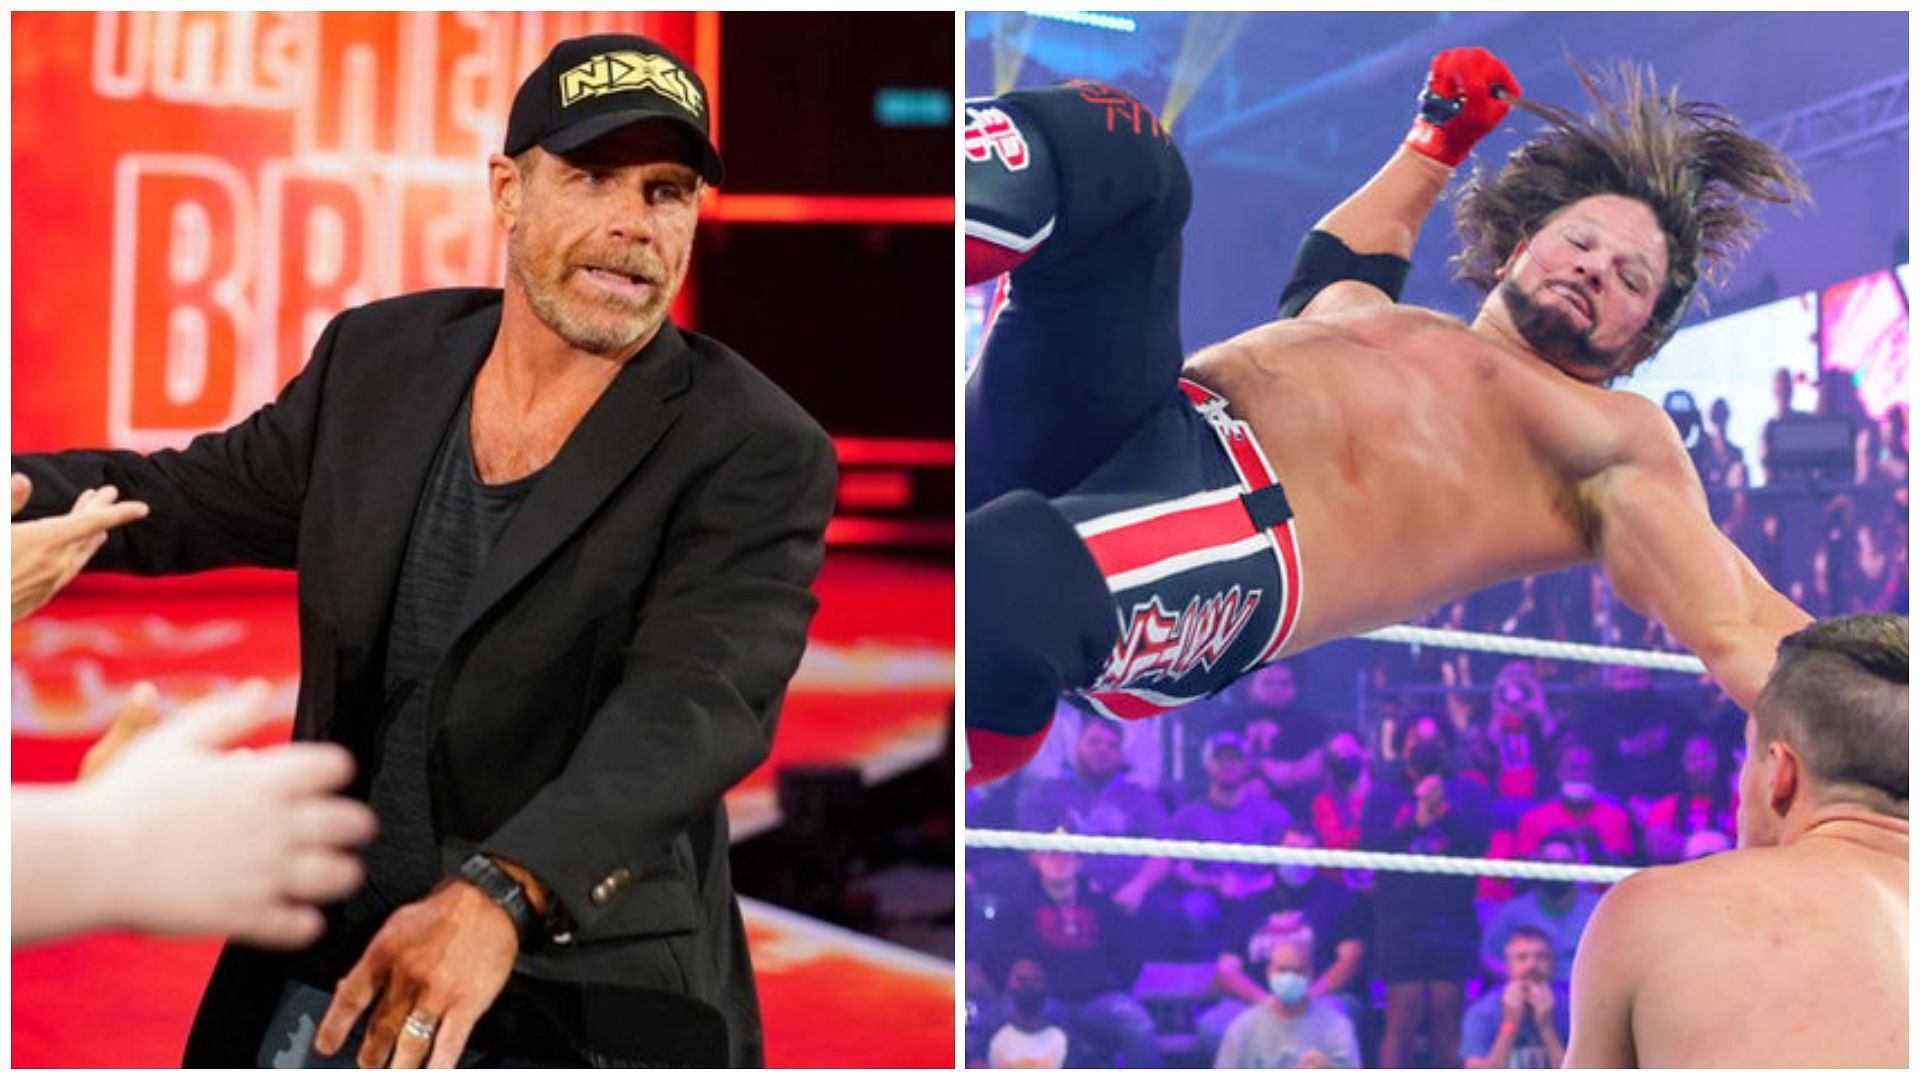 Shawn Michaels serves as the WWE